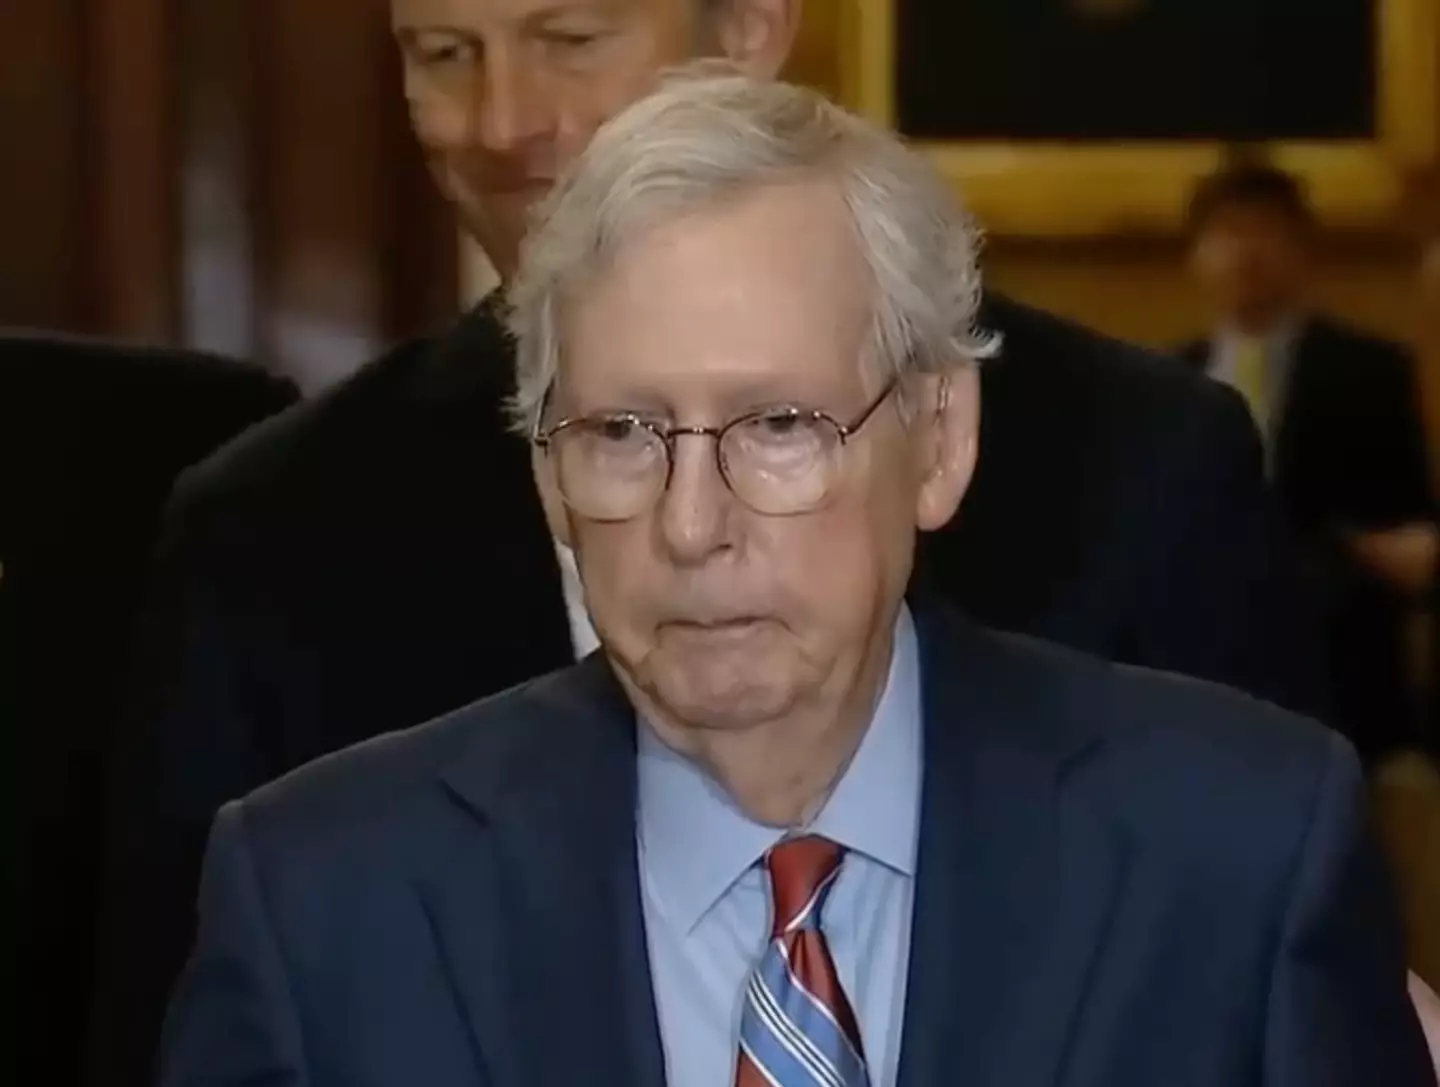 Mitch McConnell was led away after he 'froze'.